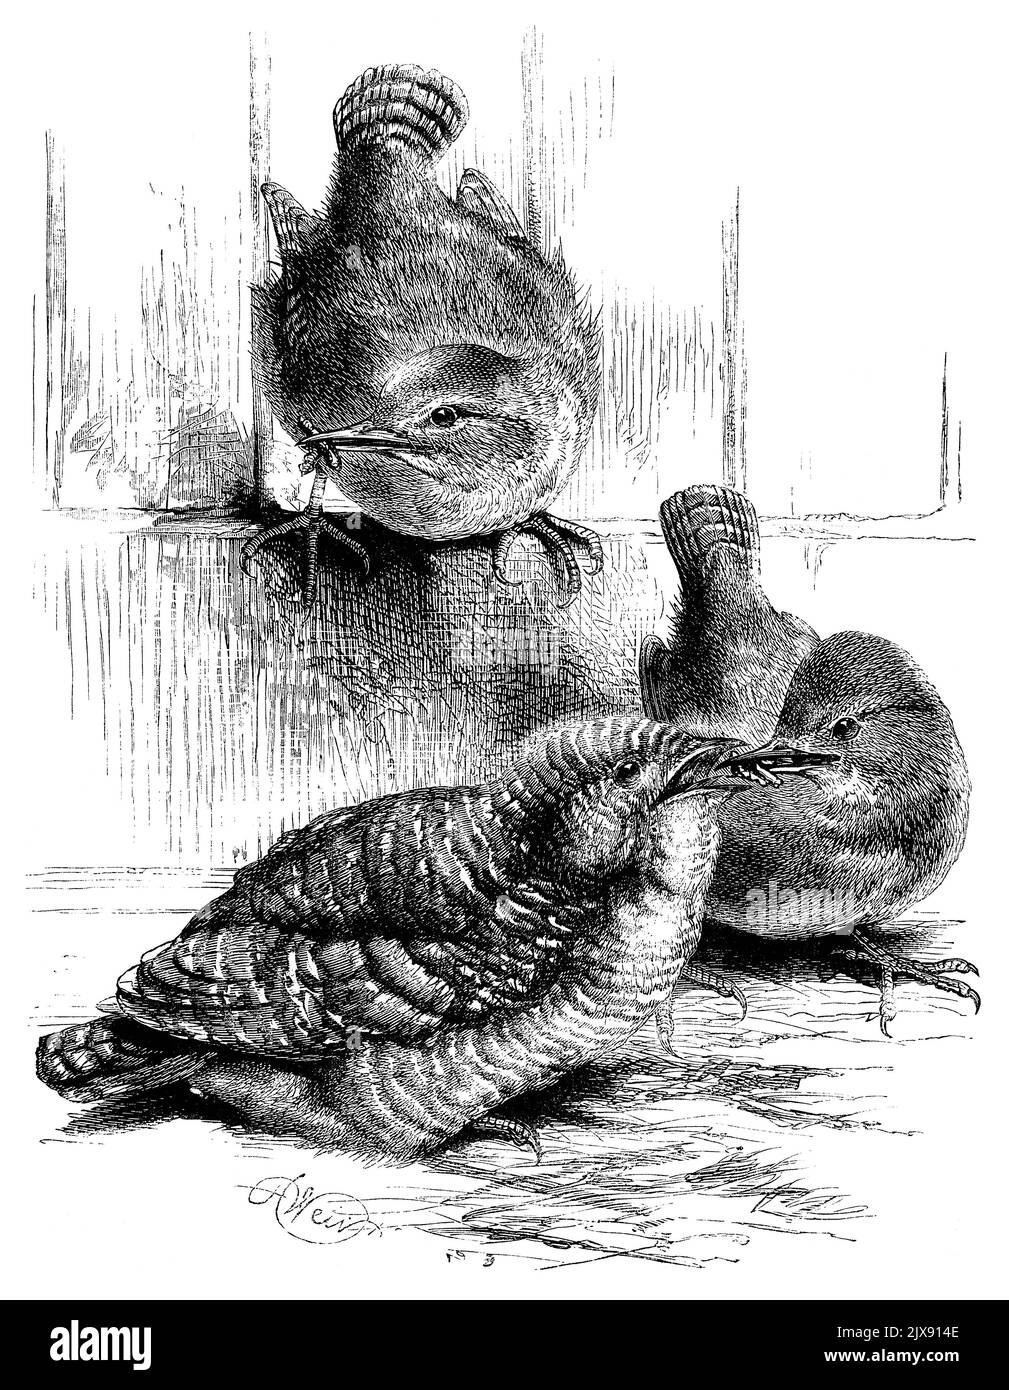 1872 vintage Victorian engraving of two wrens (Troglodytes troglodytes) feeding a young cuckoo (Cuculus canorus). Drawn by Harrison Weir. Stock Photo